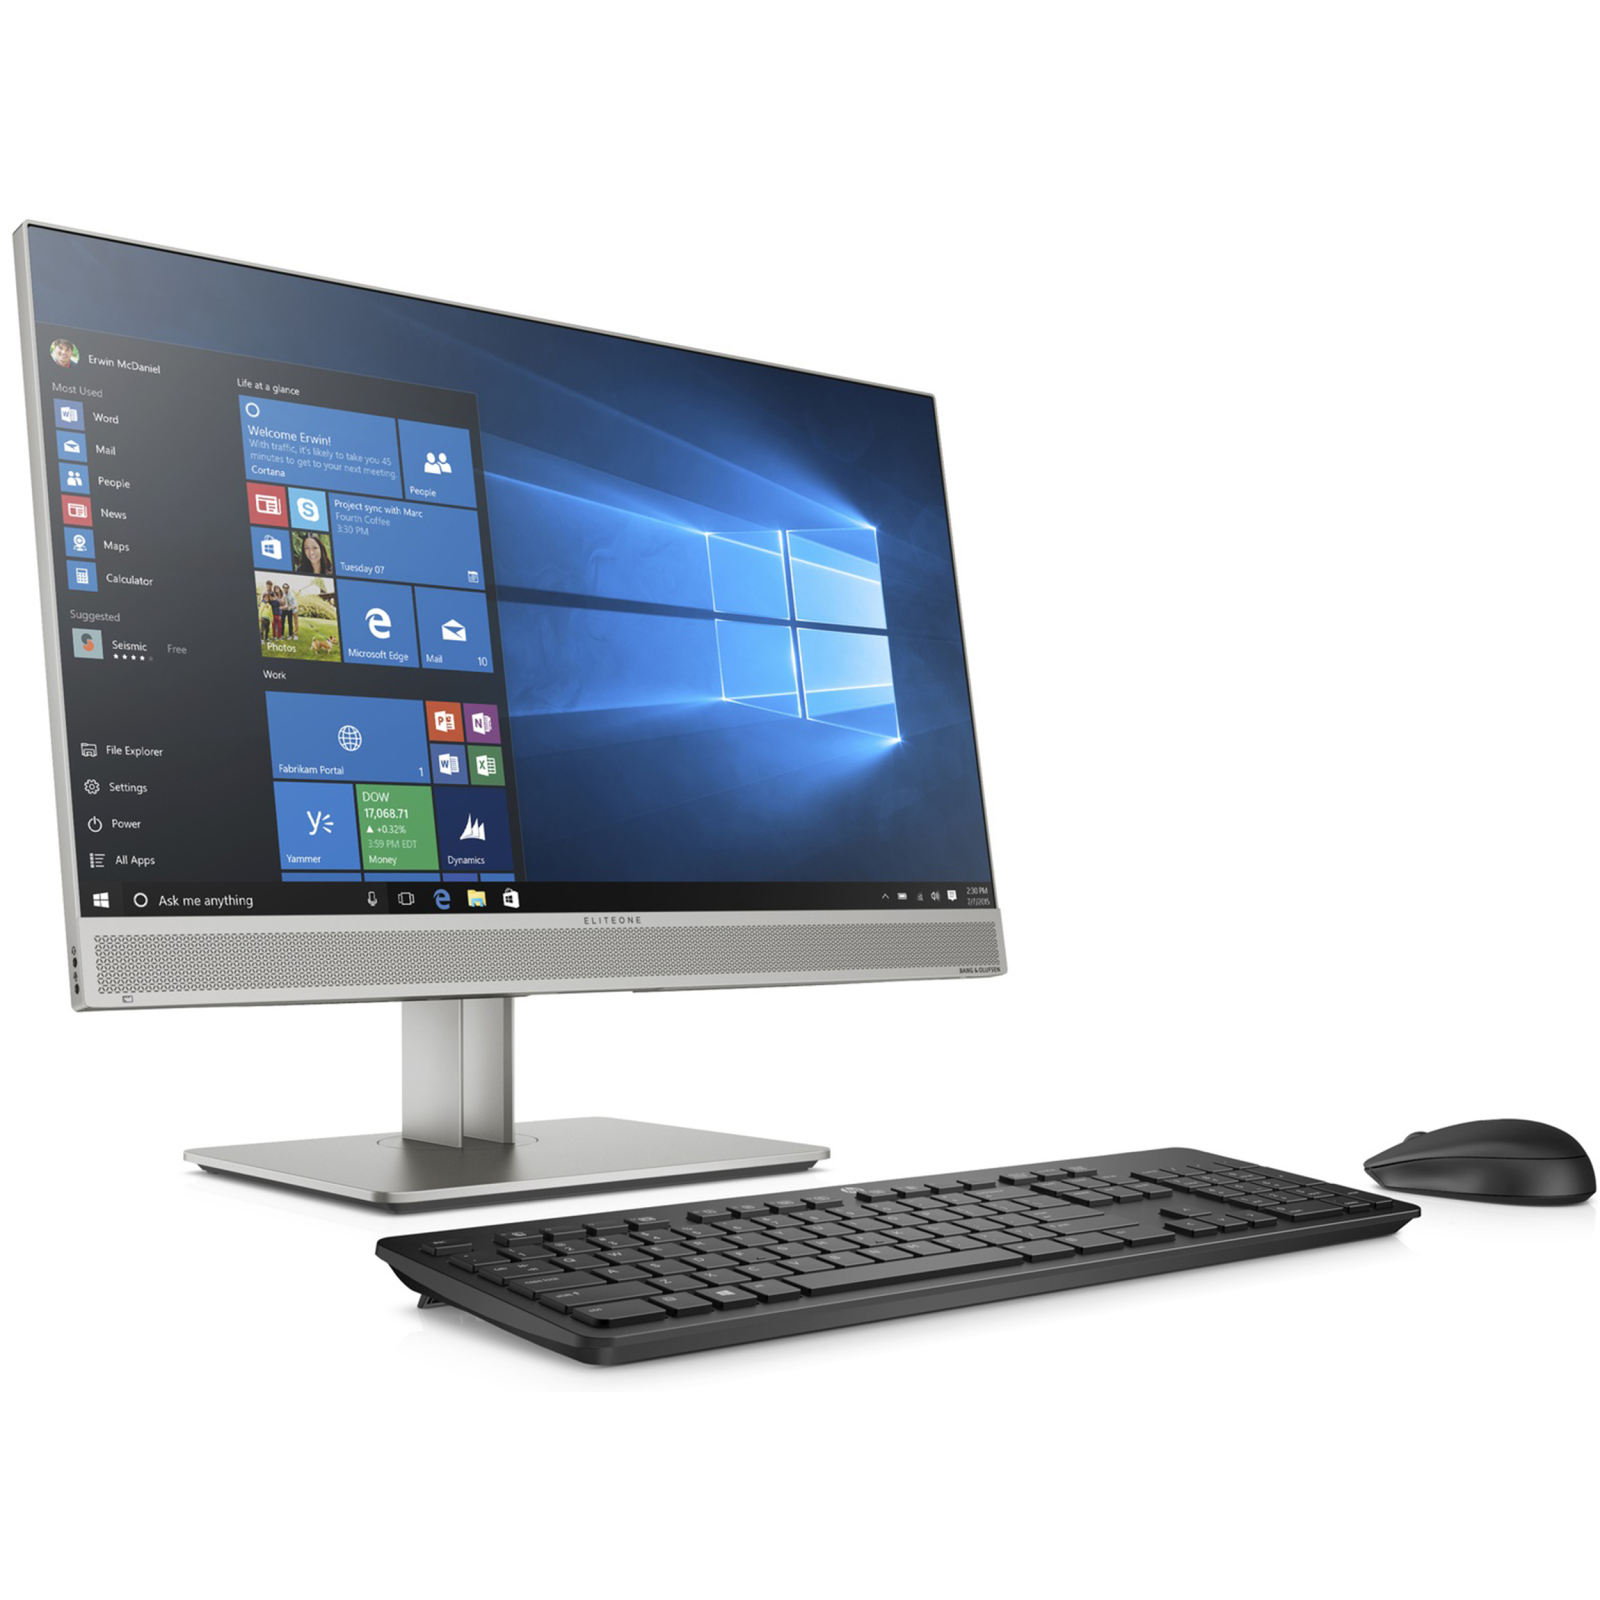  HP G4-X1 All in One